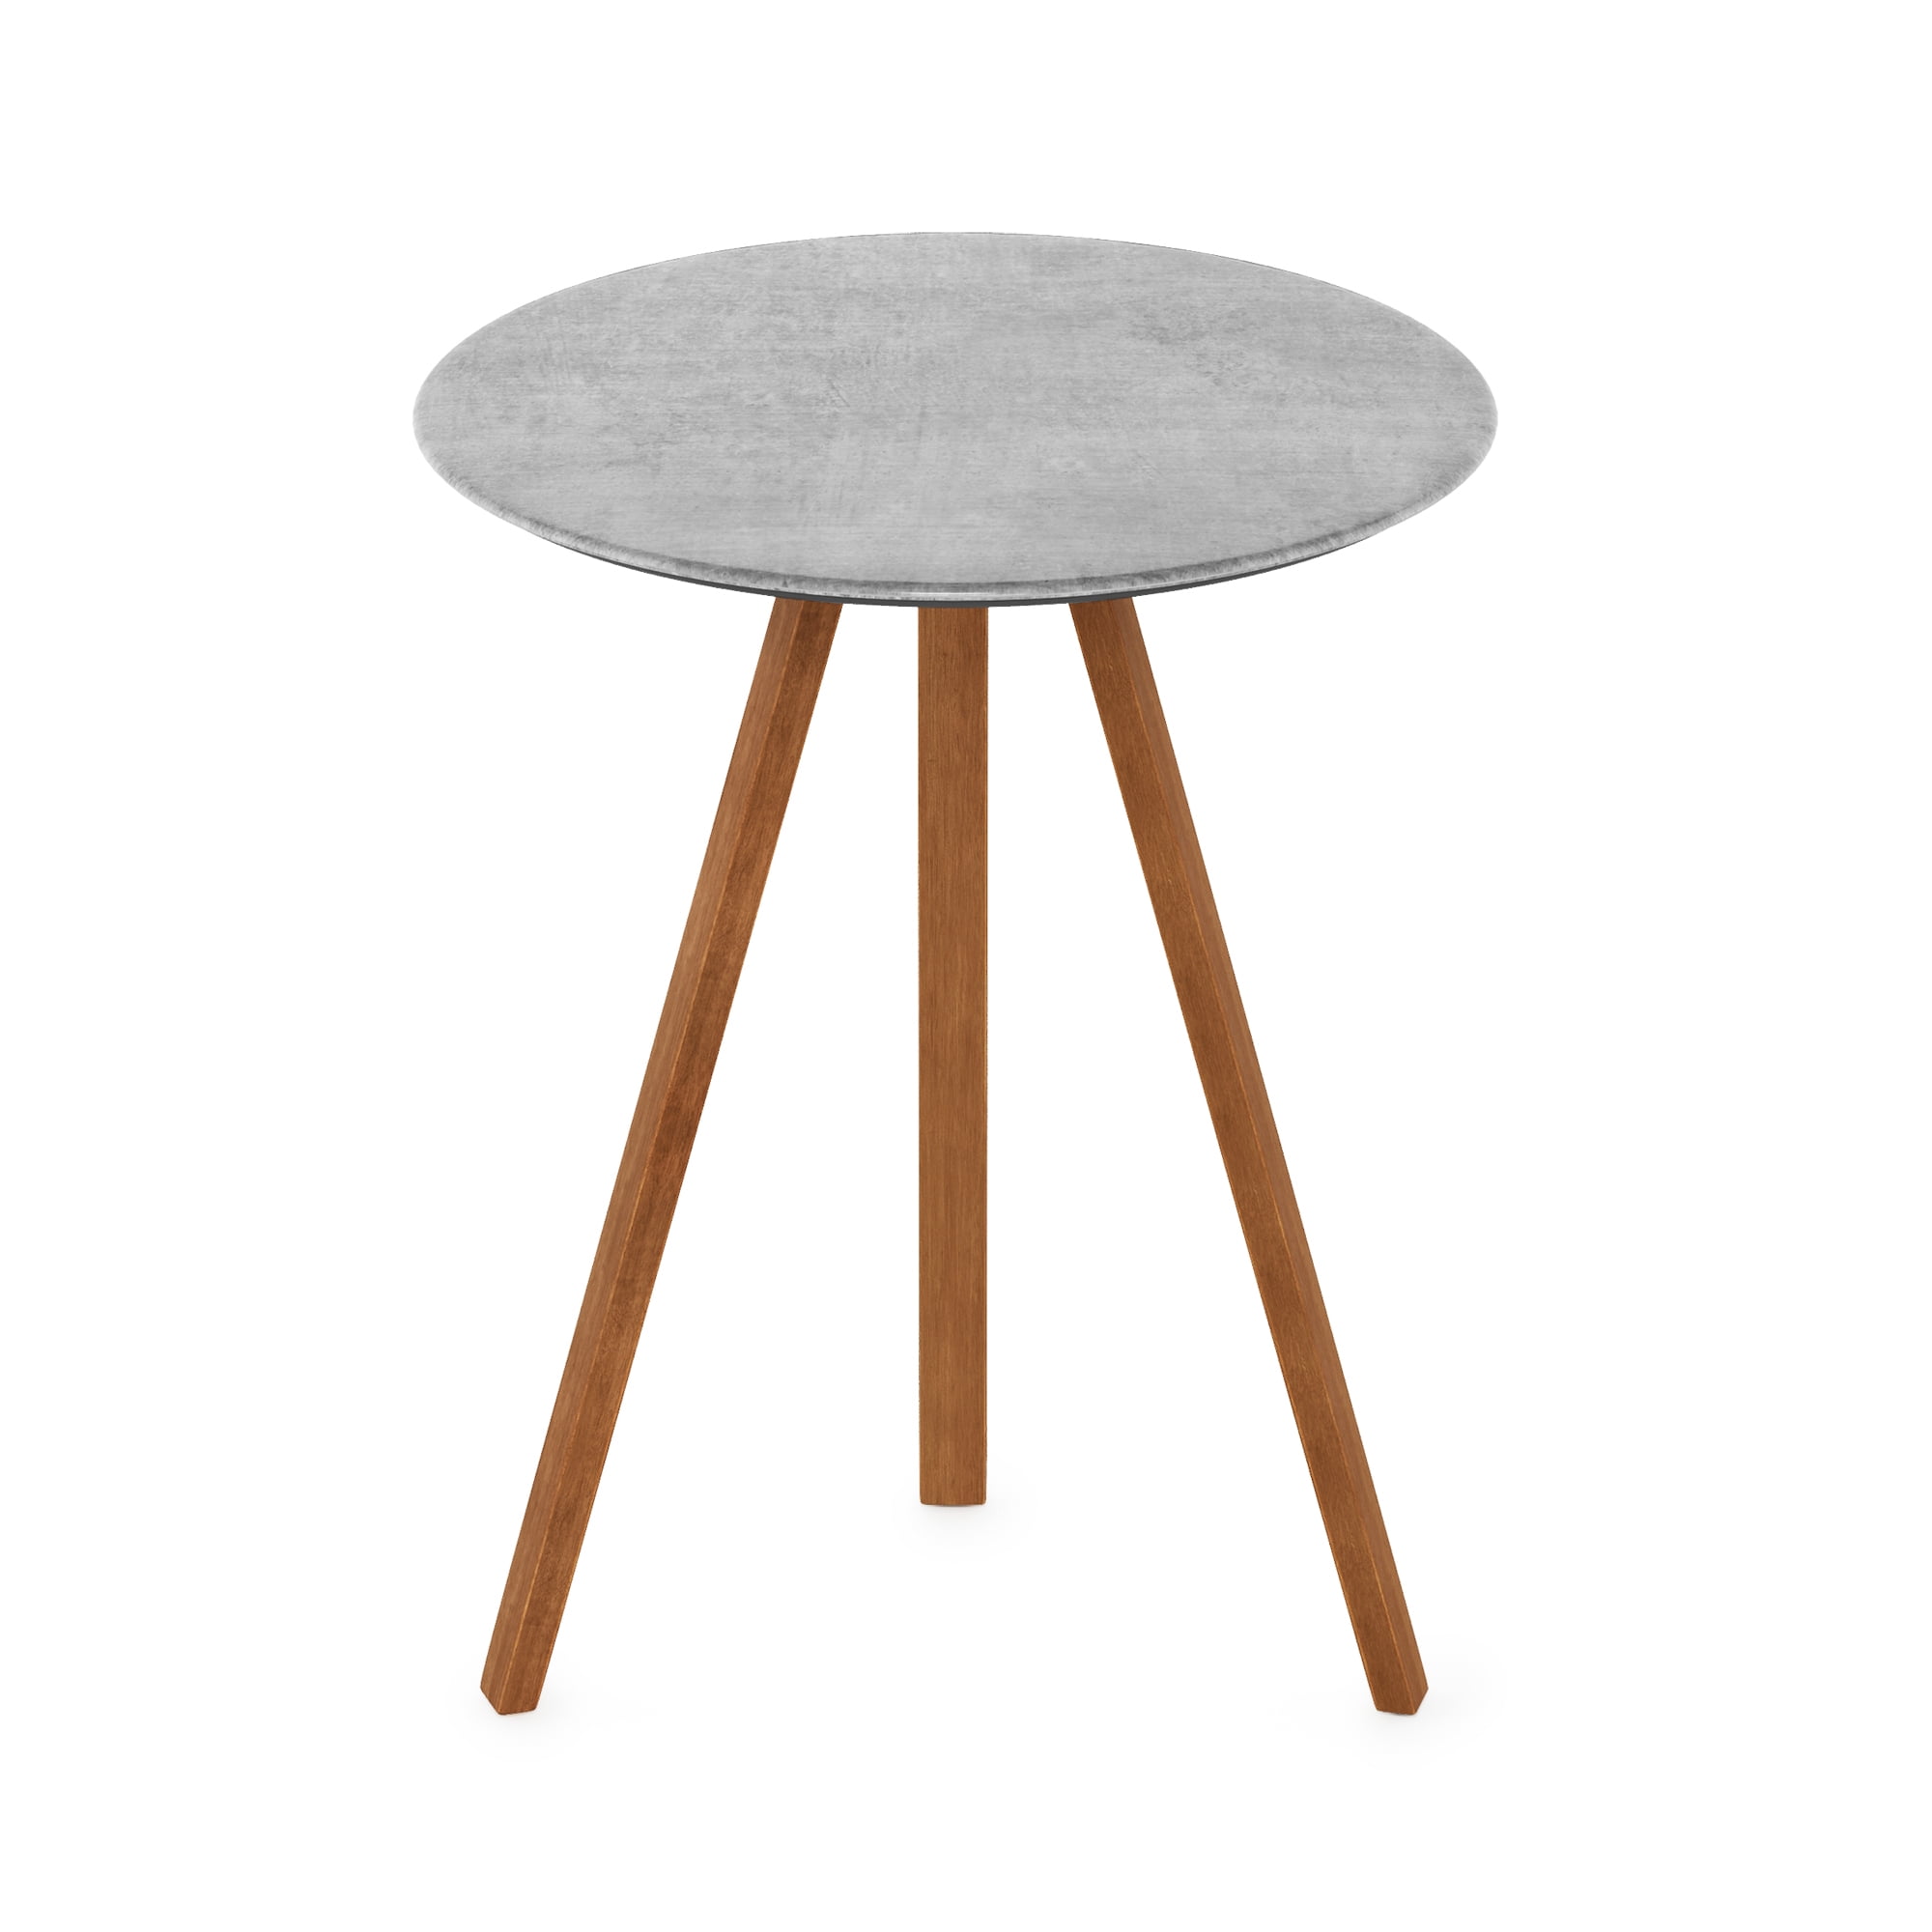 Cement Furinno FST19016CM Redang Outdoor 3-Leg Round Smart Top Table 24 Inches